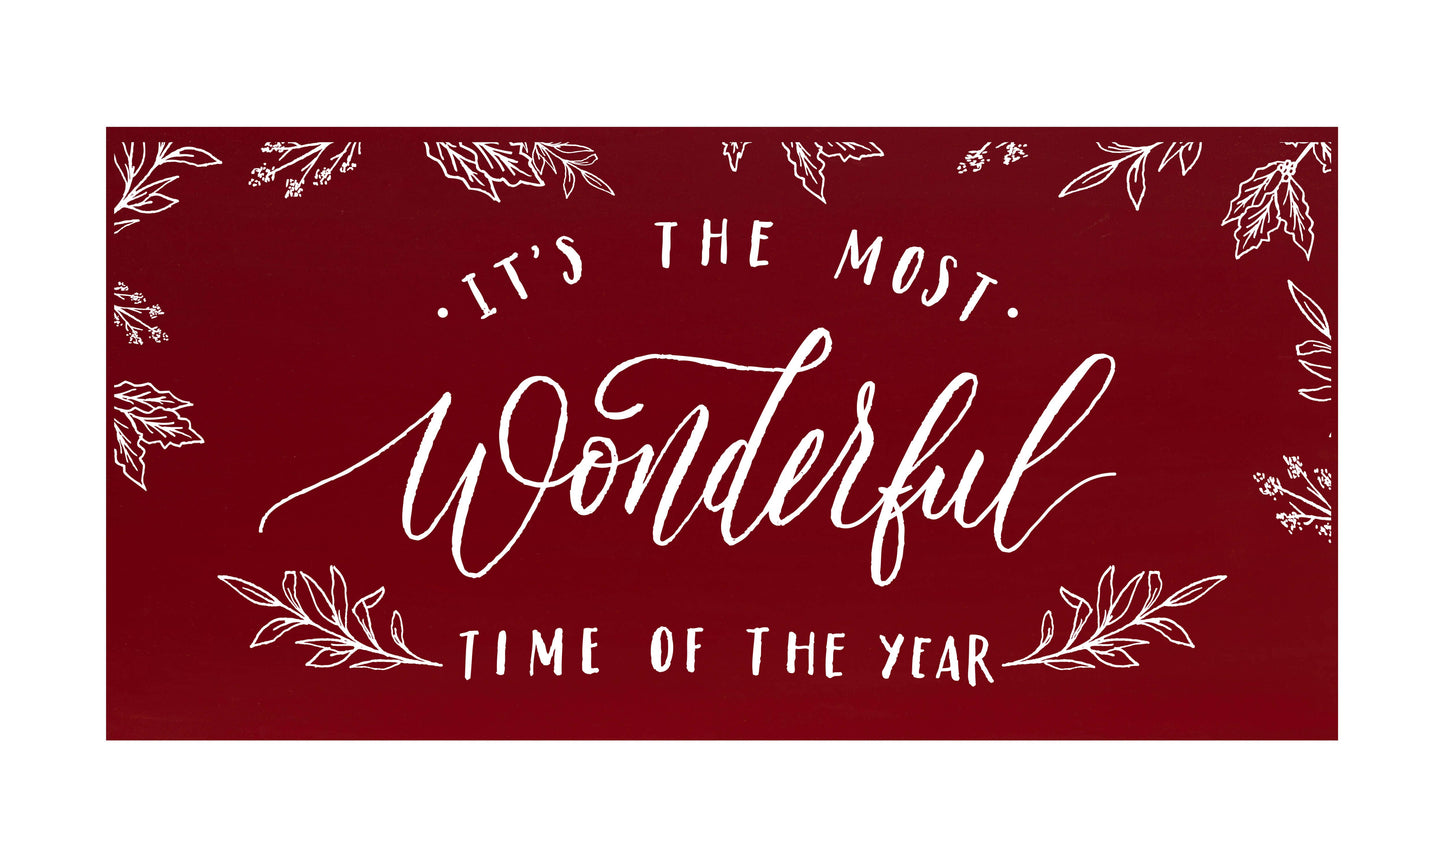 Joyfully Said Wooden signs 24 inches x 12 inches / Red-White Text / Light brown stain It's the Most Wonderful Time of the Year